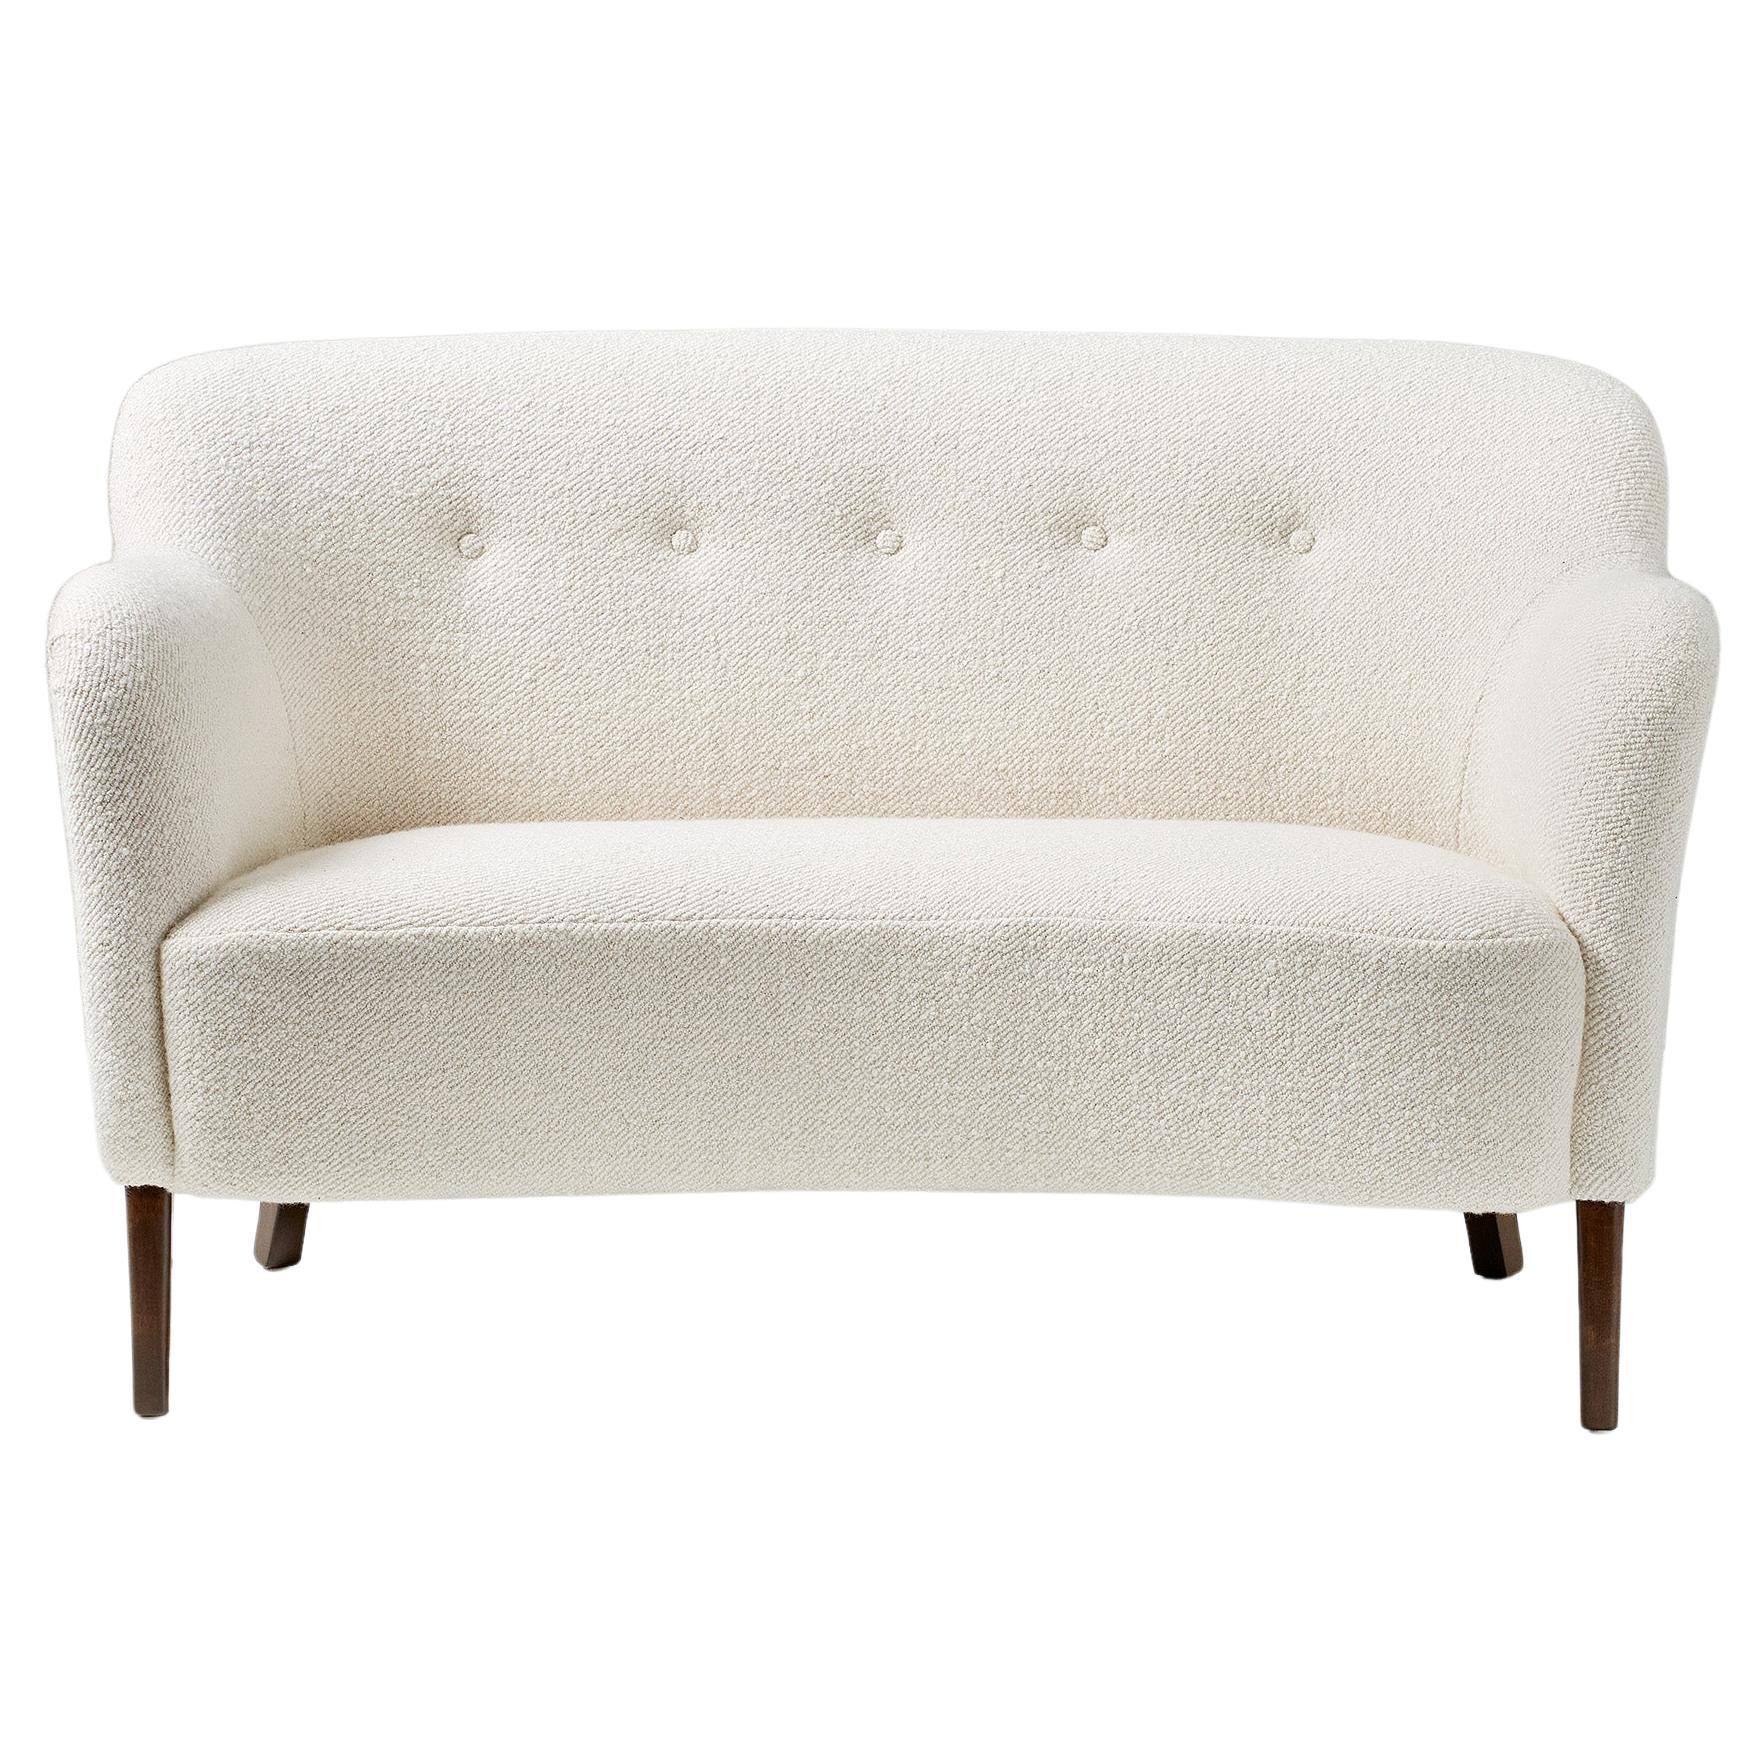 Custom Made Love Seat Sofa by Alfred Kristensen. Available in COM